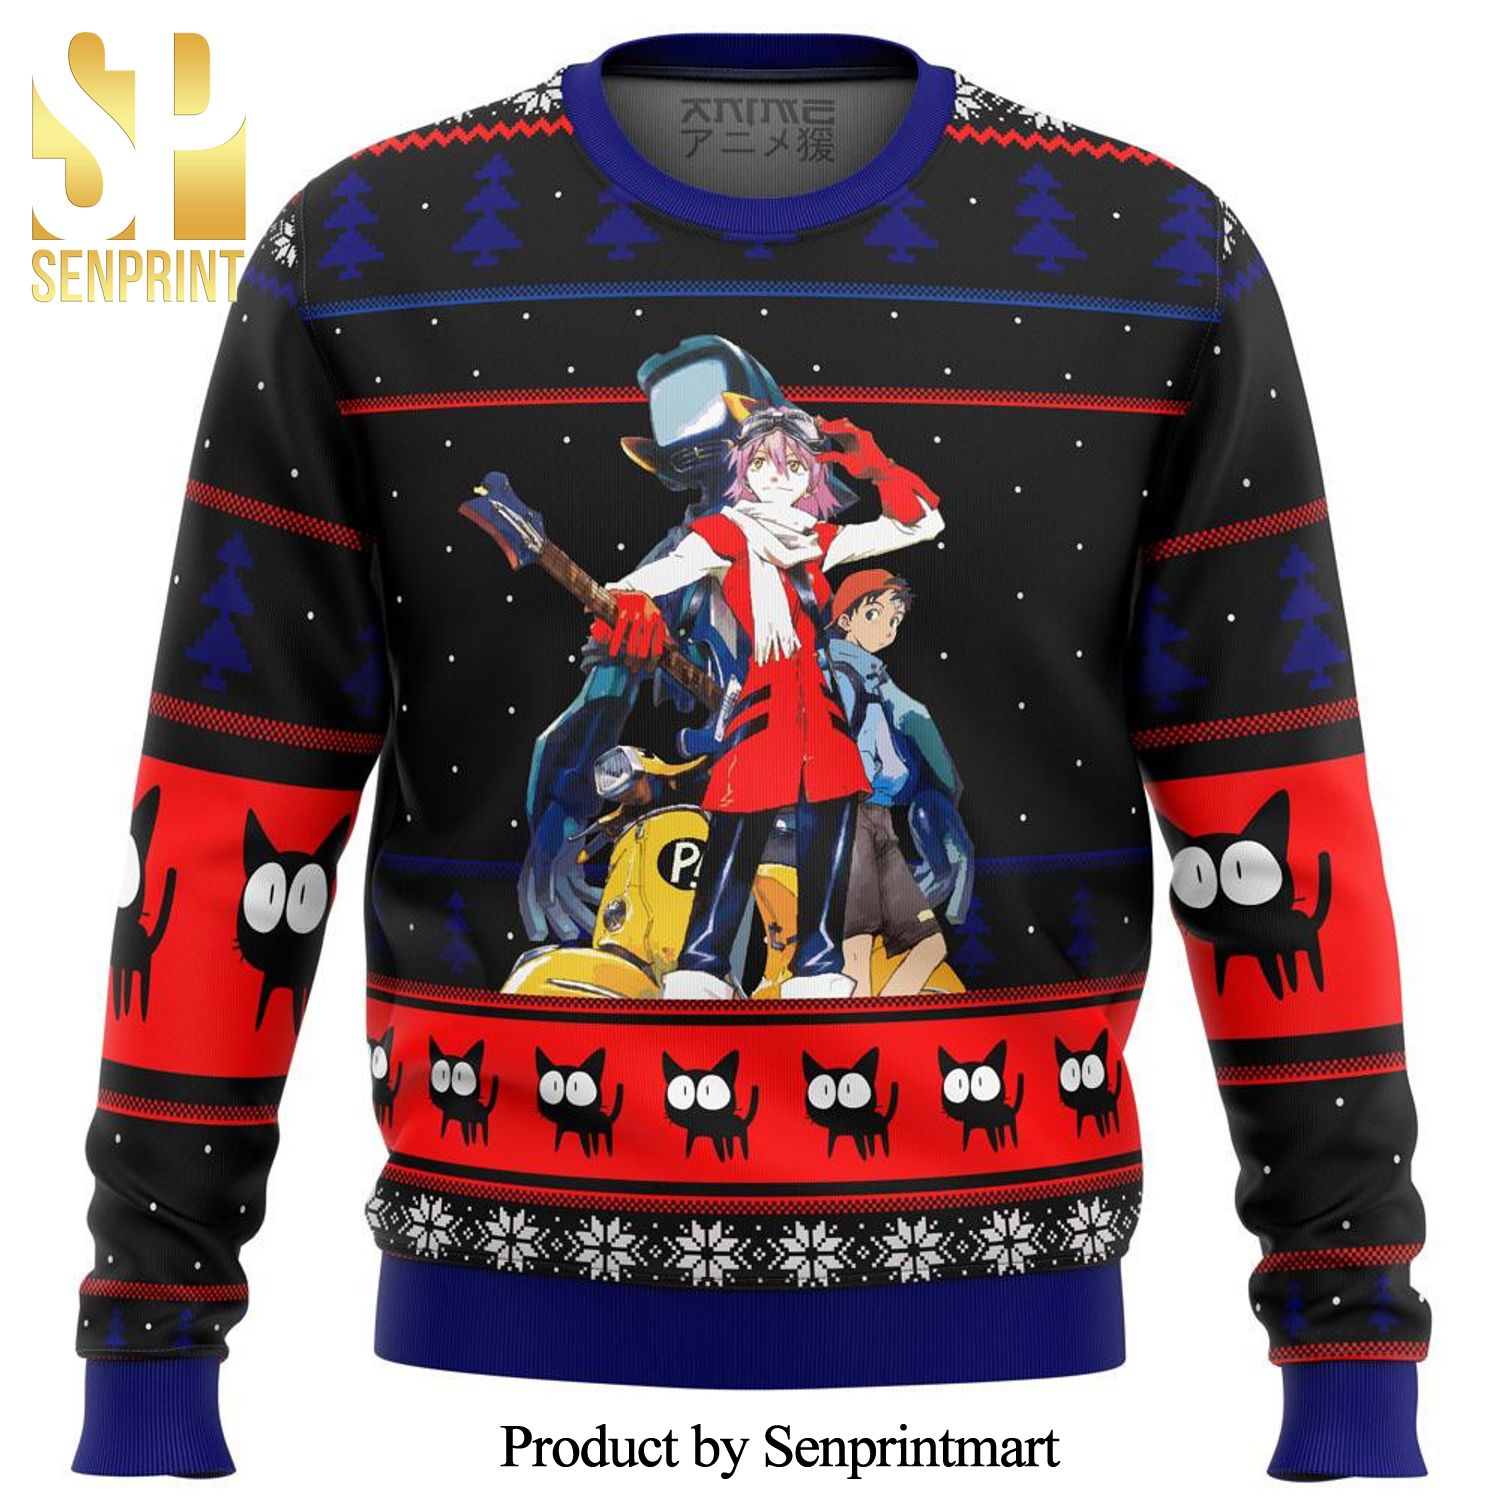 FLCL Poster Premium Manga Anime Knitted Ugly Christmas Sweater